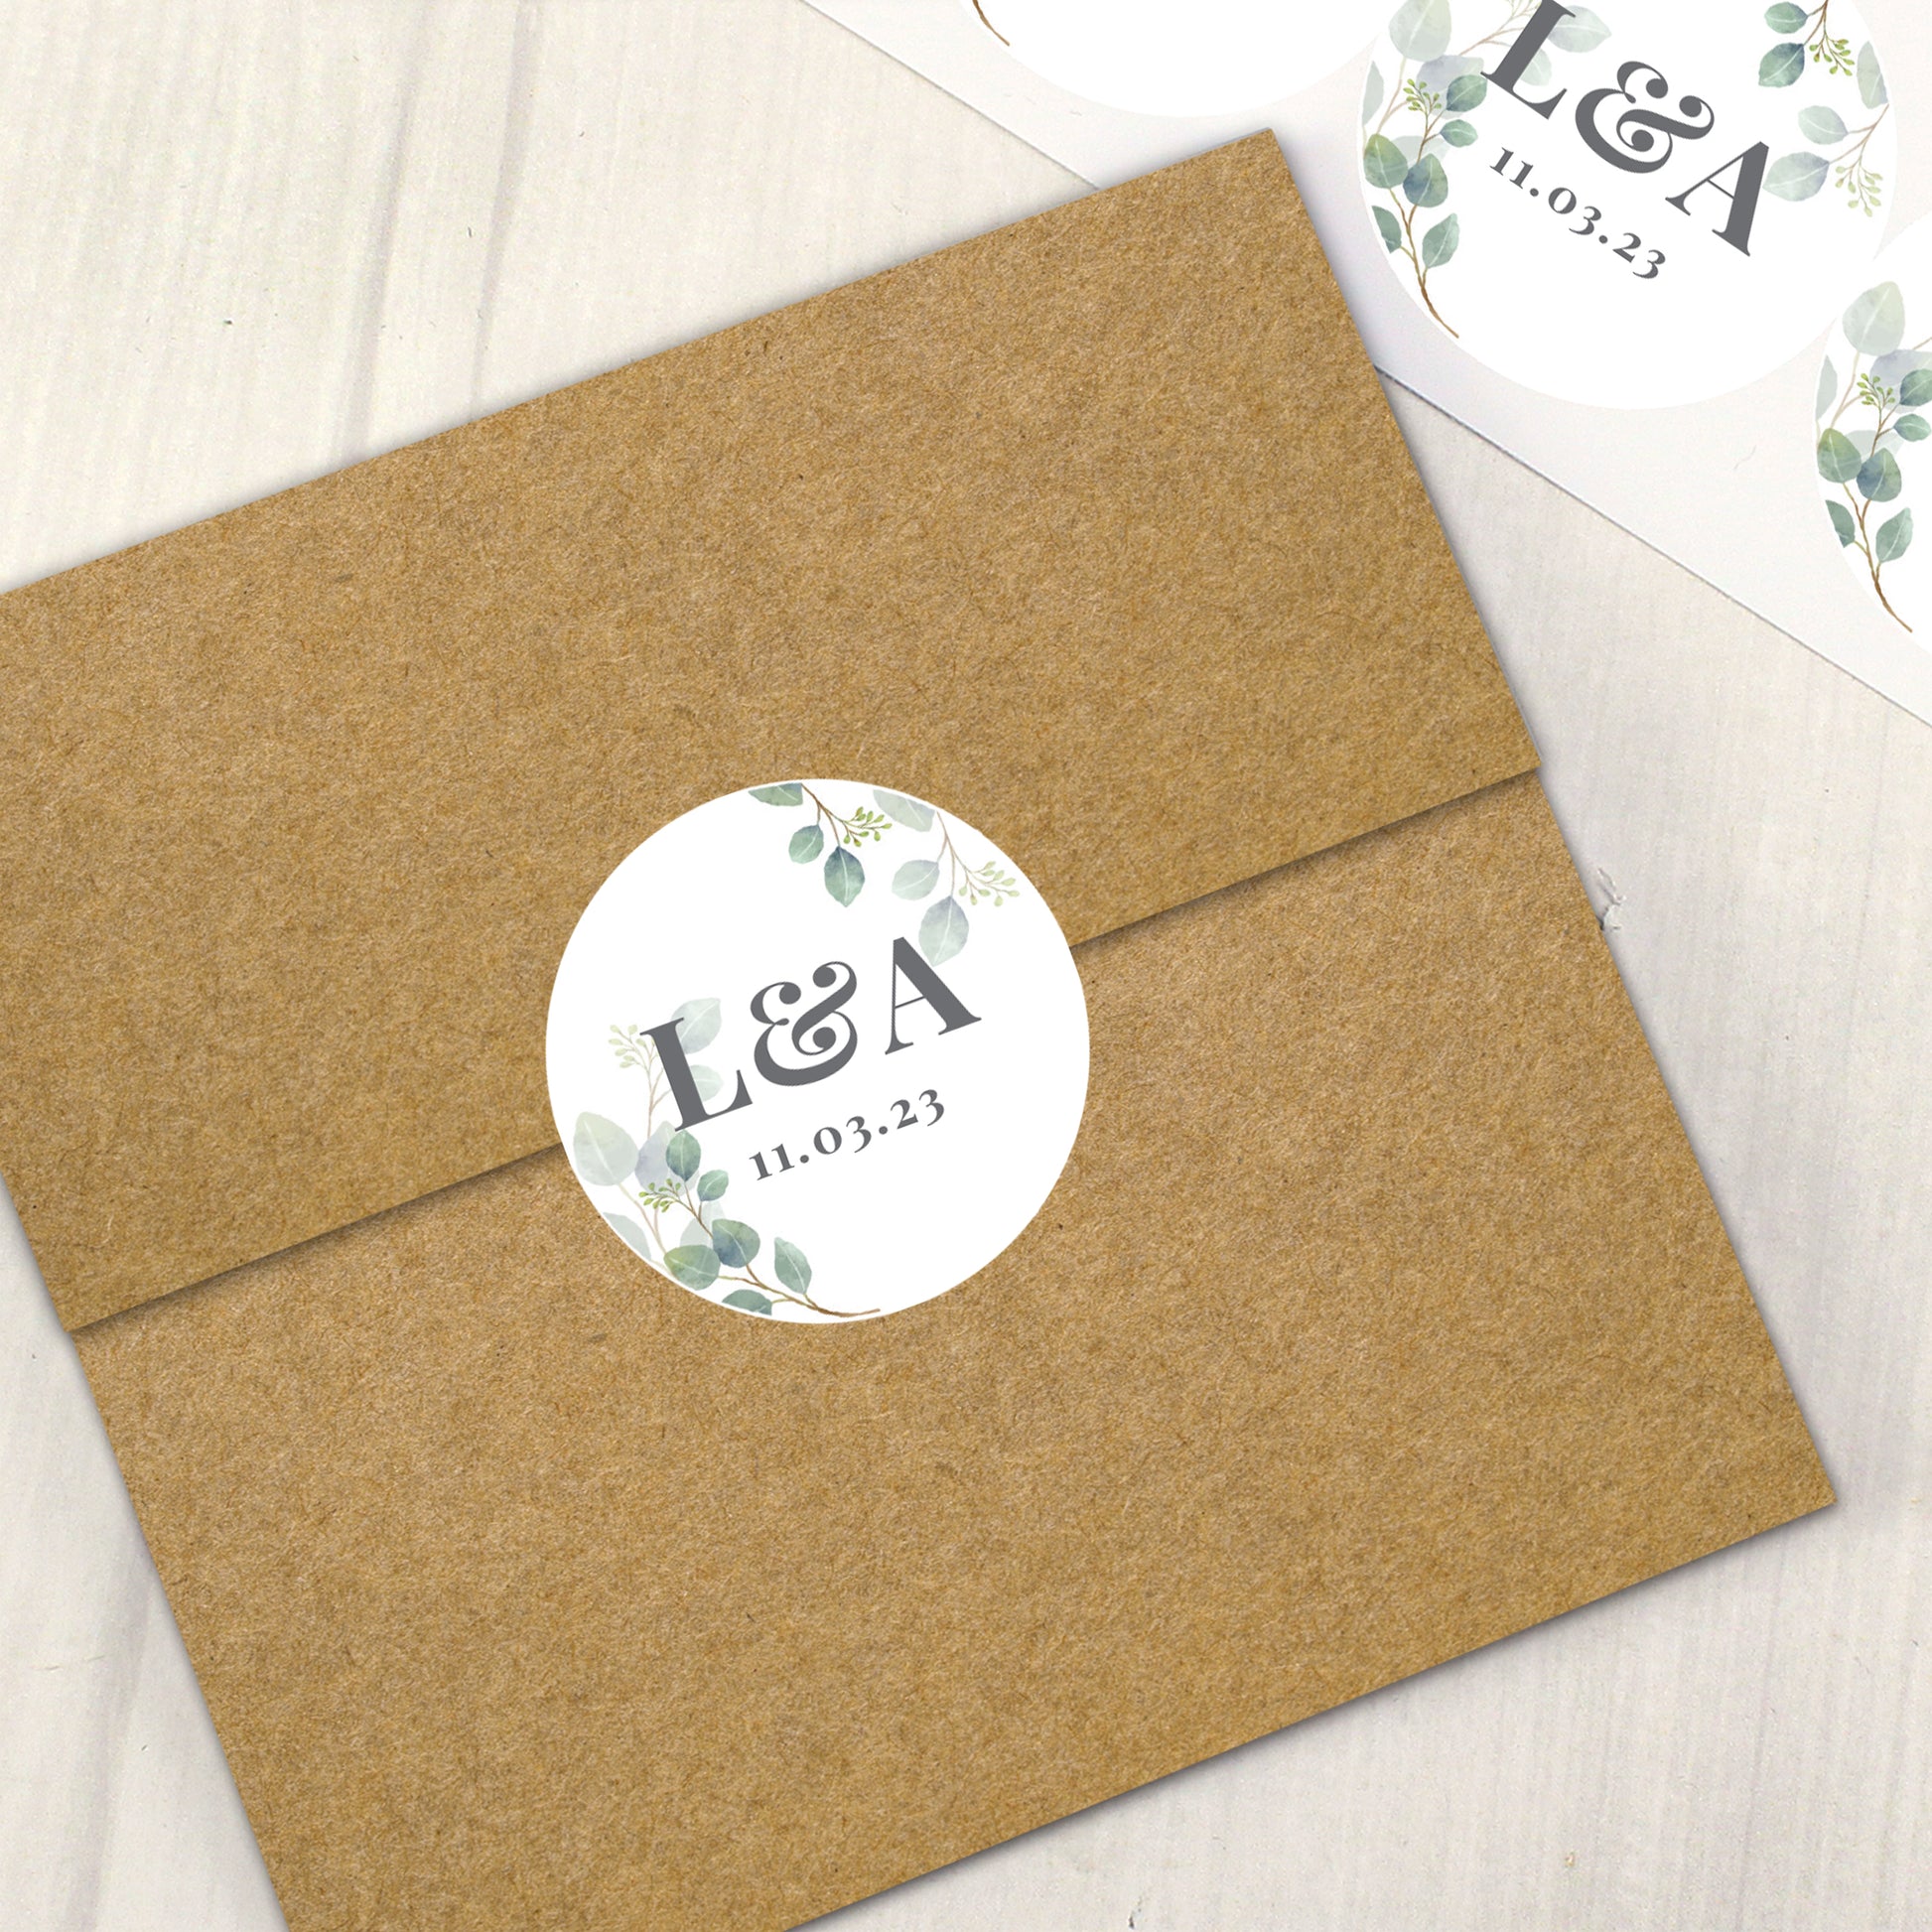 Personalised wedding sticky labels with pretty summer leafe design. Initials with ampersand and wedding date.